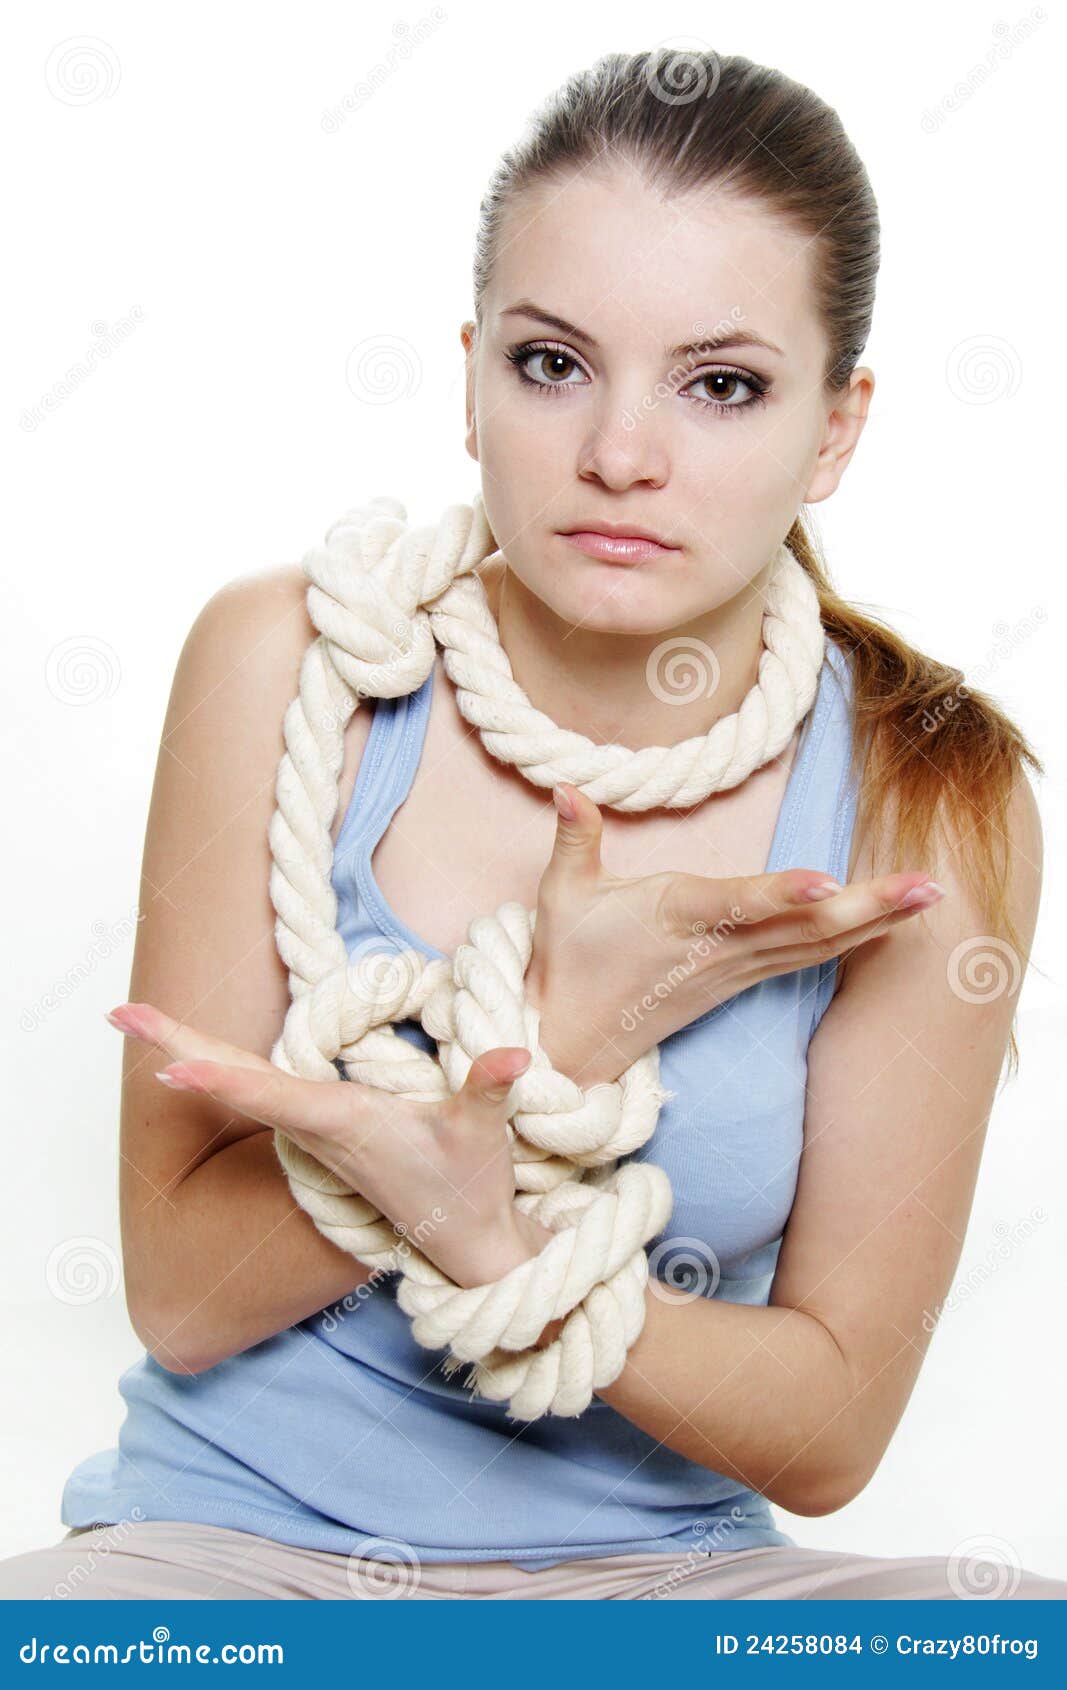 woman-tied-up-with-rope-stock-photo-image-of-dependency-24258084